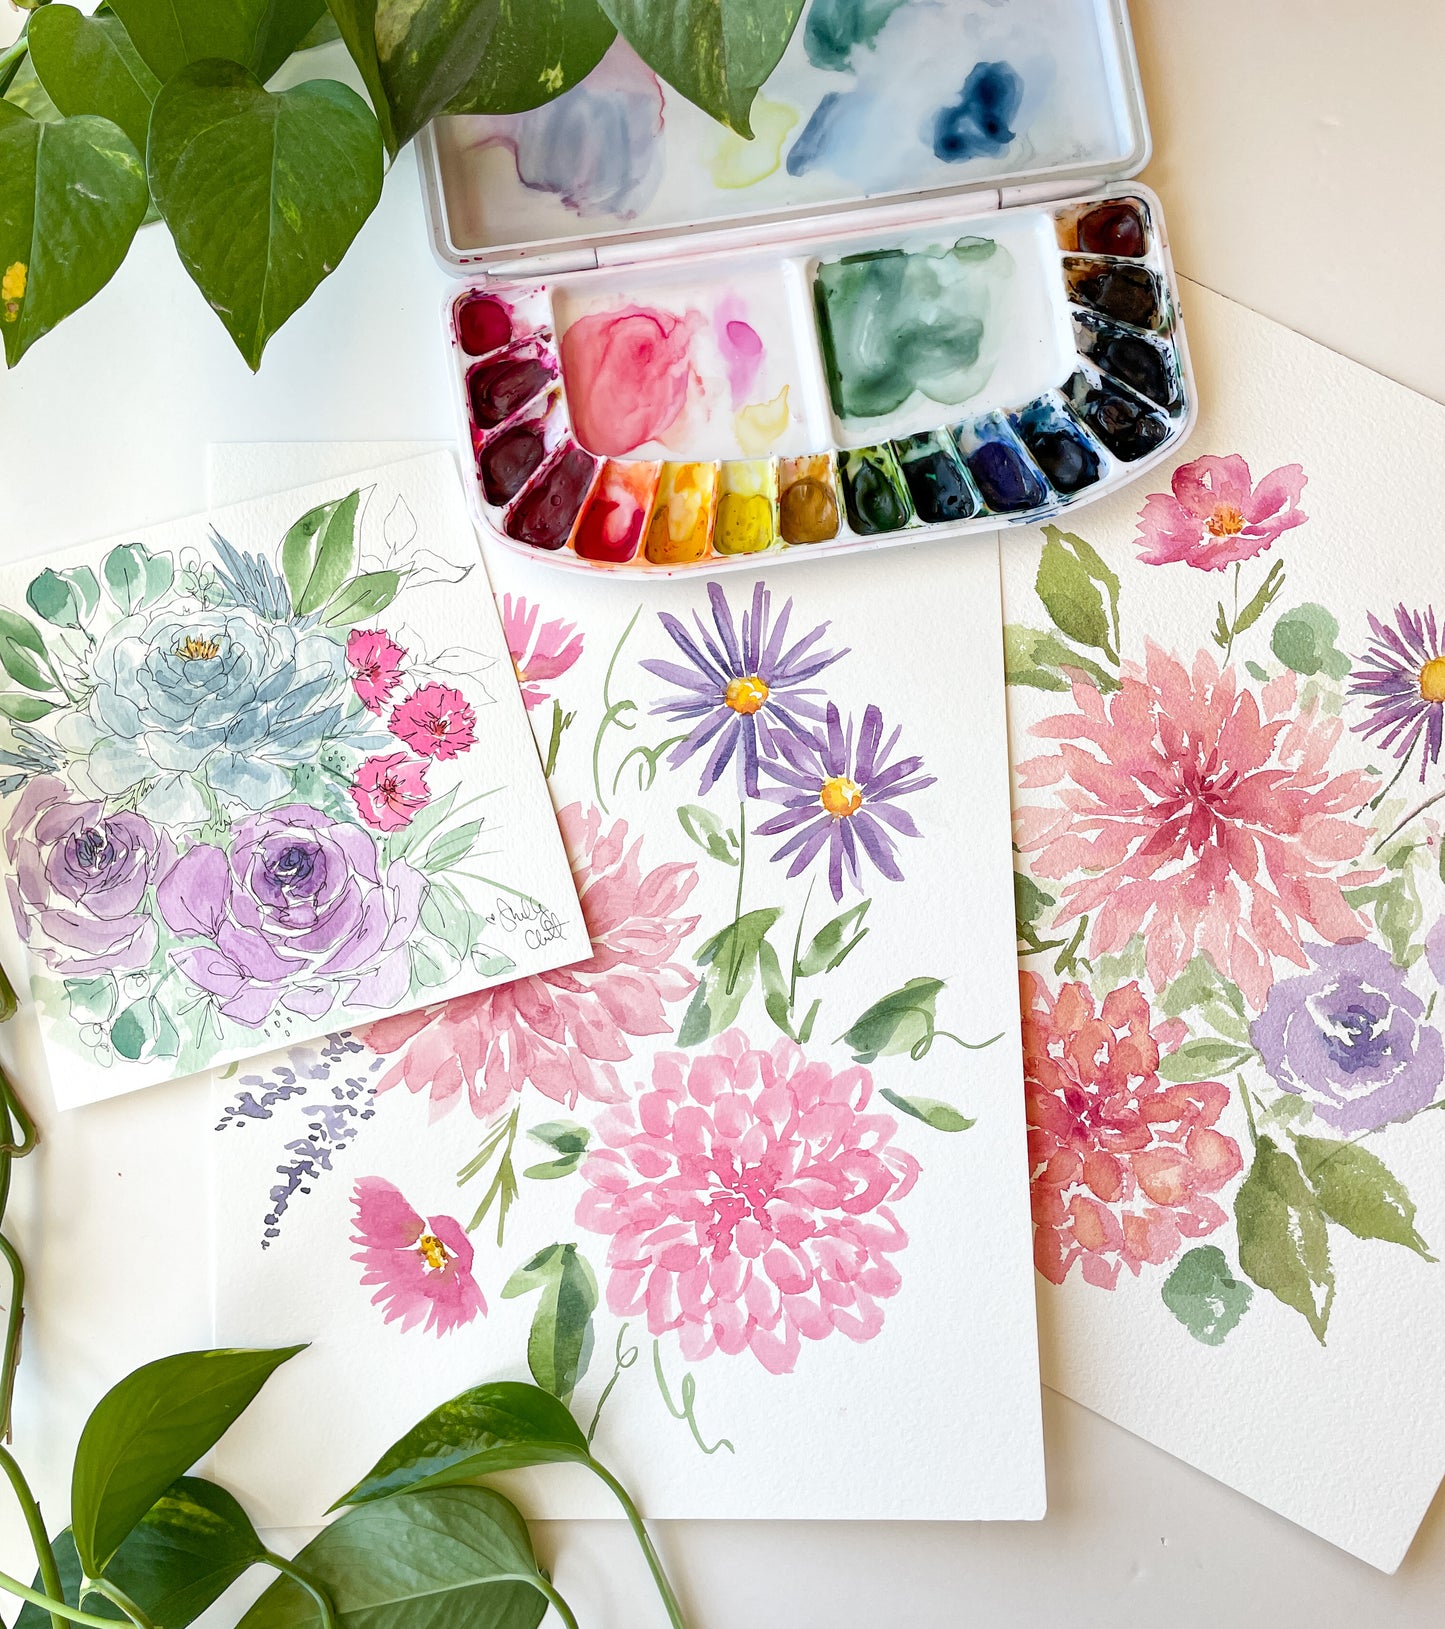 Watercolor Florals Workshop at Blue Mountain Ranch in Highland, UT